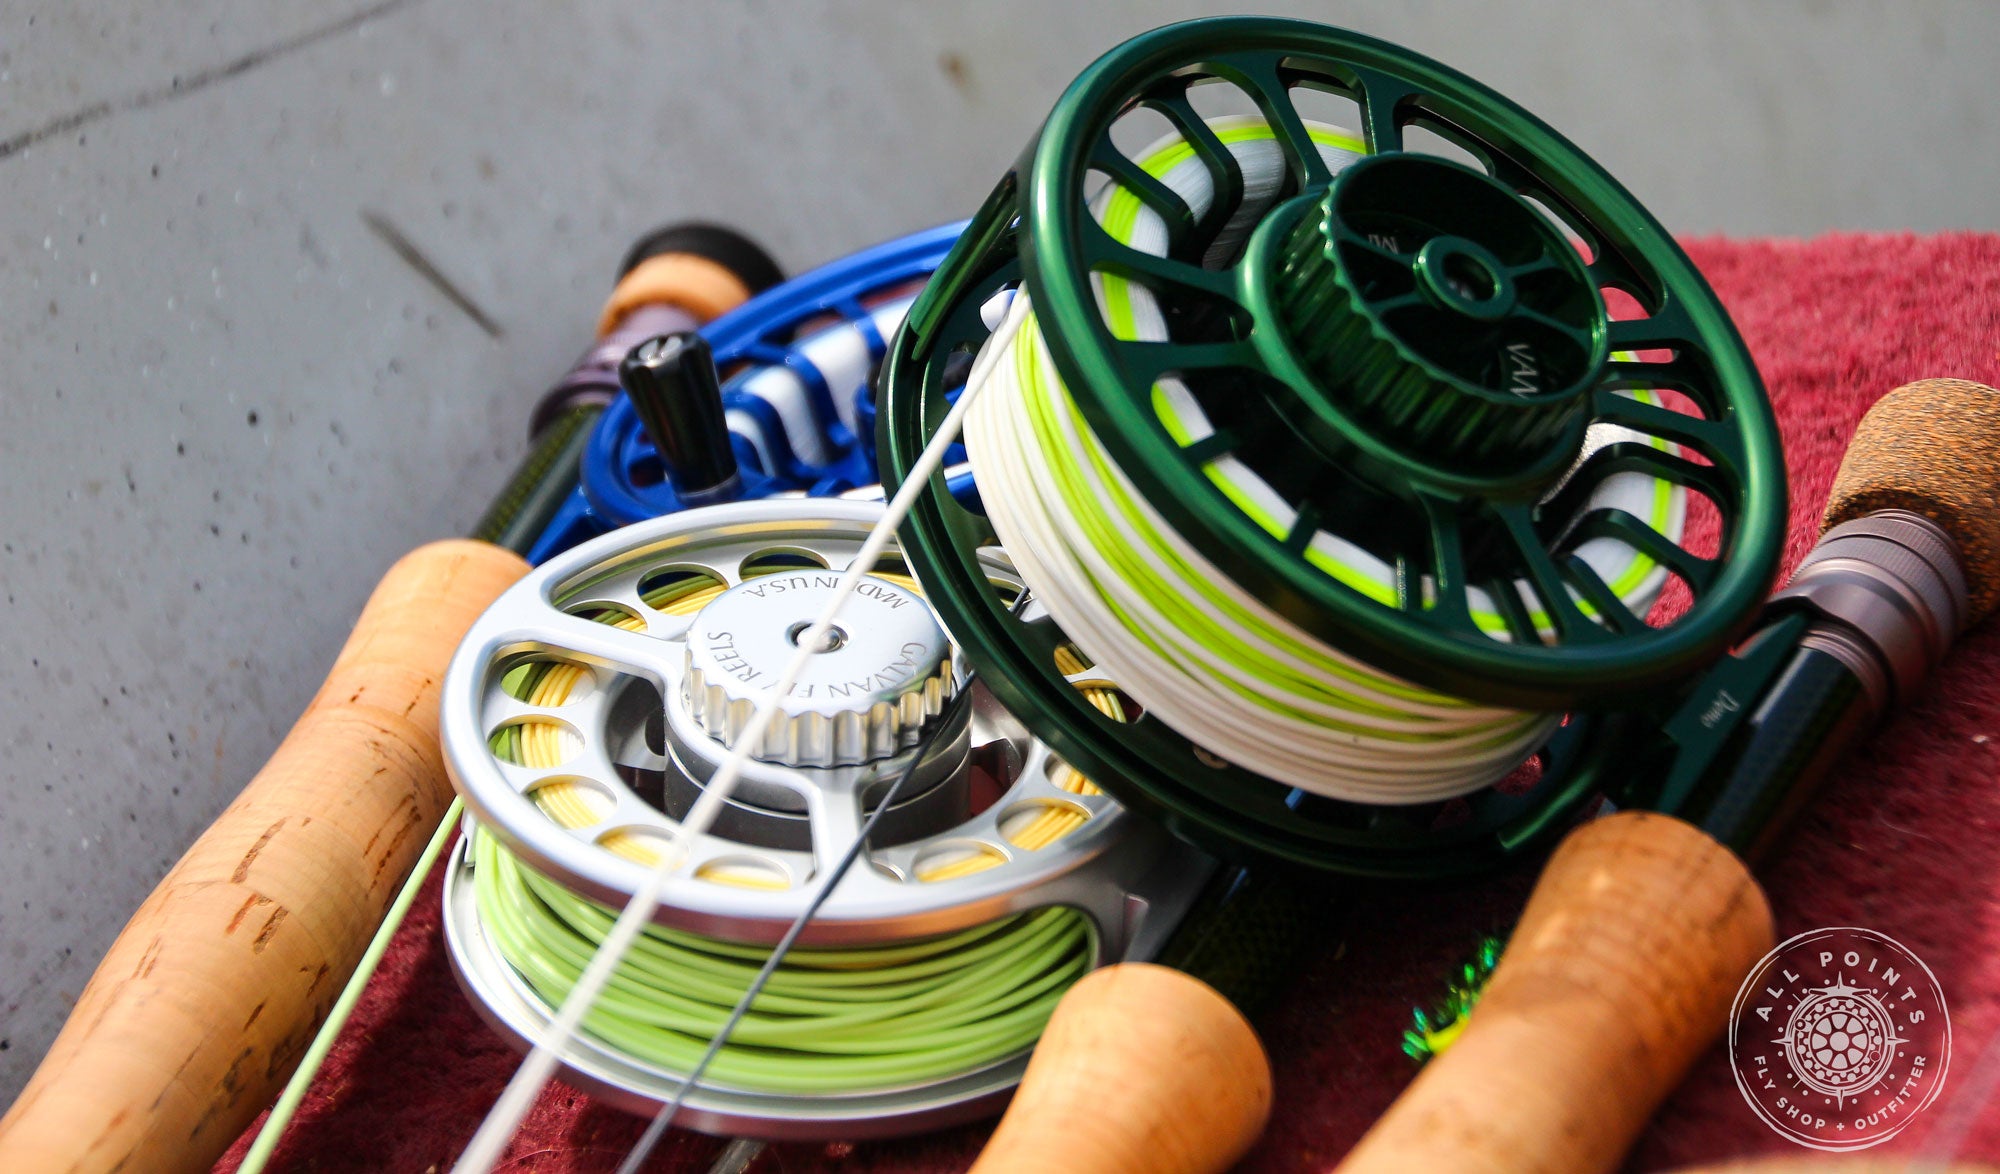 Gear Review: Galvan Torque Fly Reel - Tested on the Atikonak River